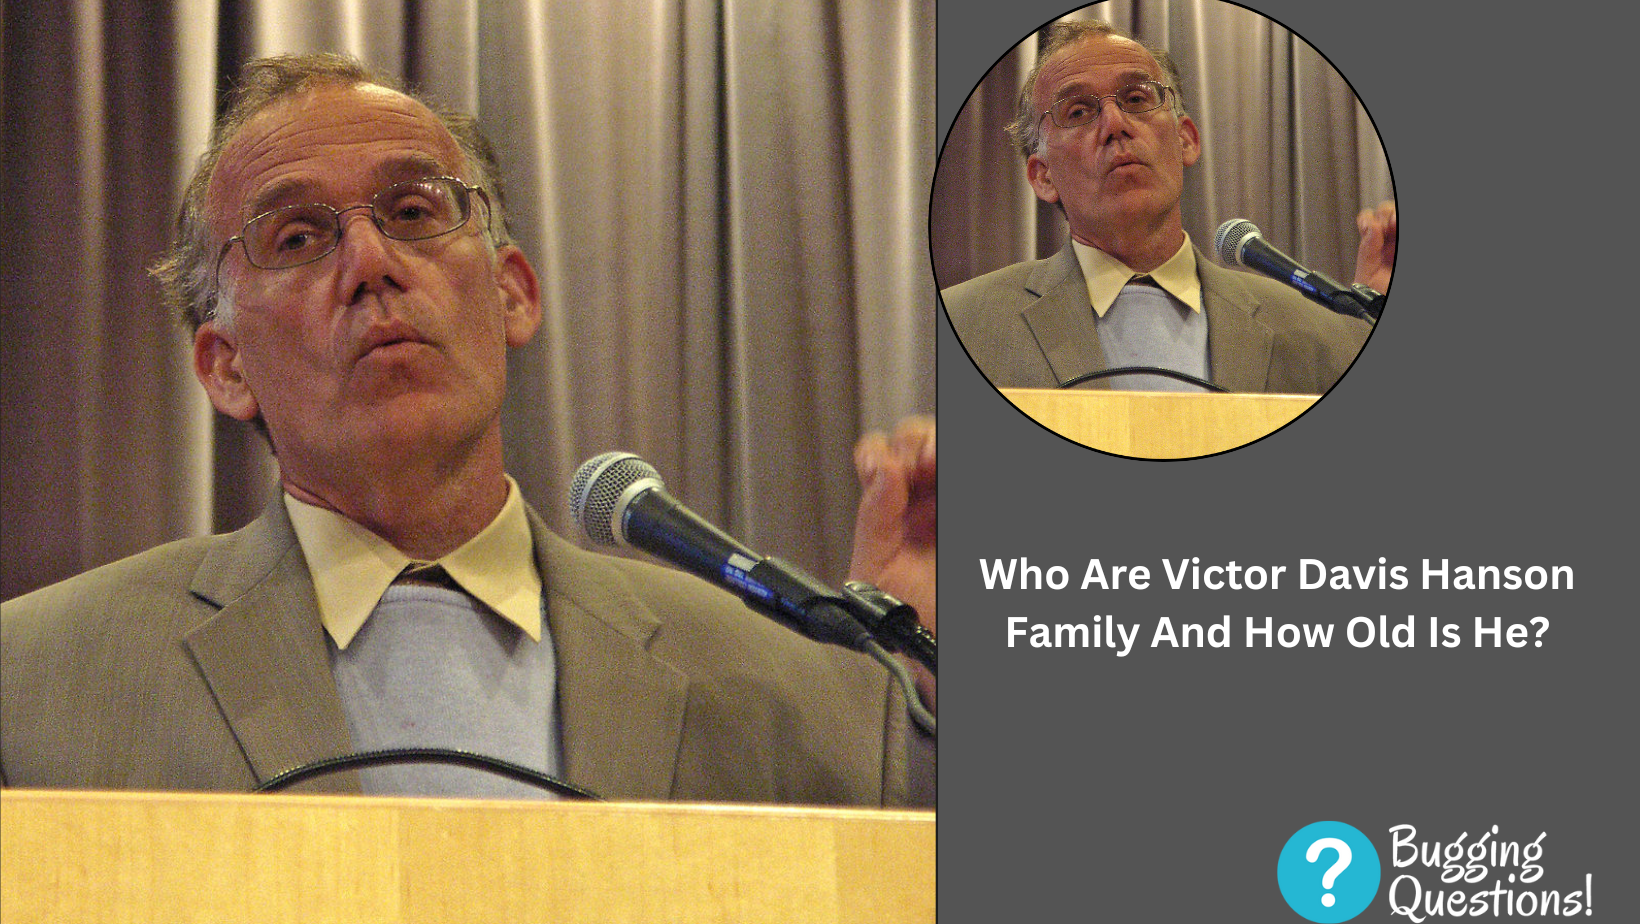 Who Are Victor Davis Hanson Family And How Old Is He?